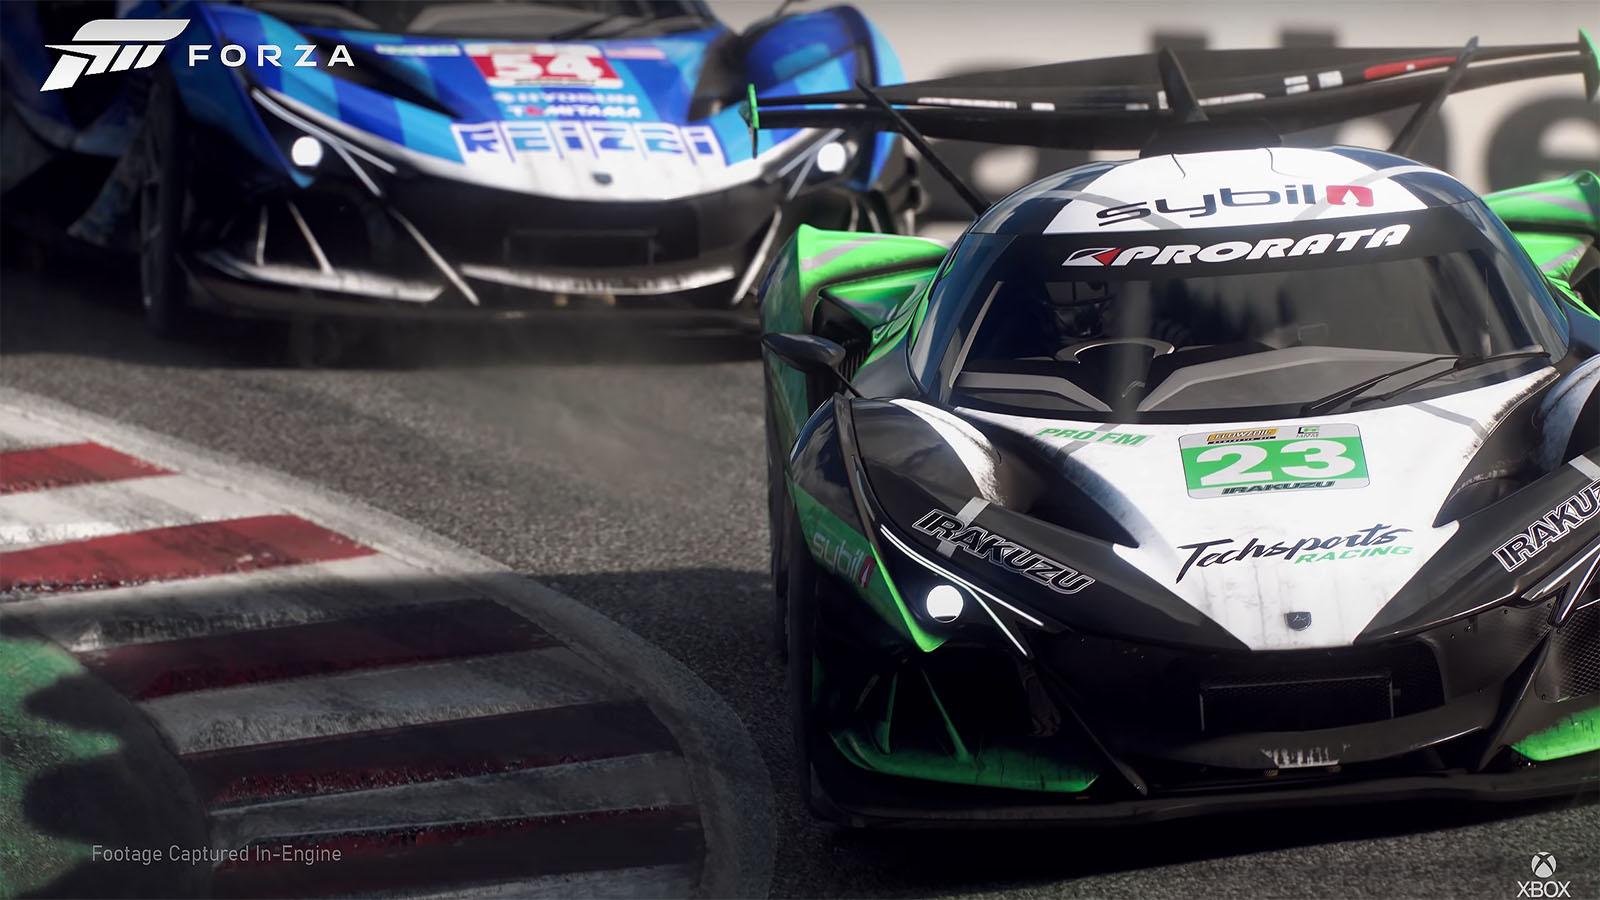 Forza Motorsport: Features, game engine & everything we know - Dexerto